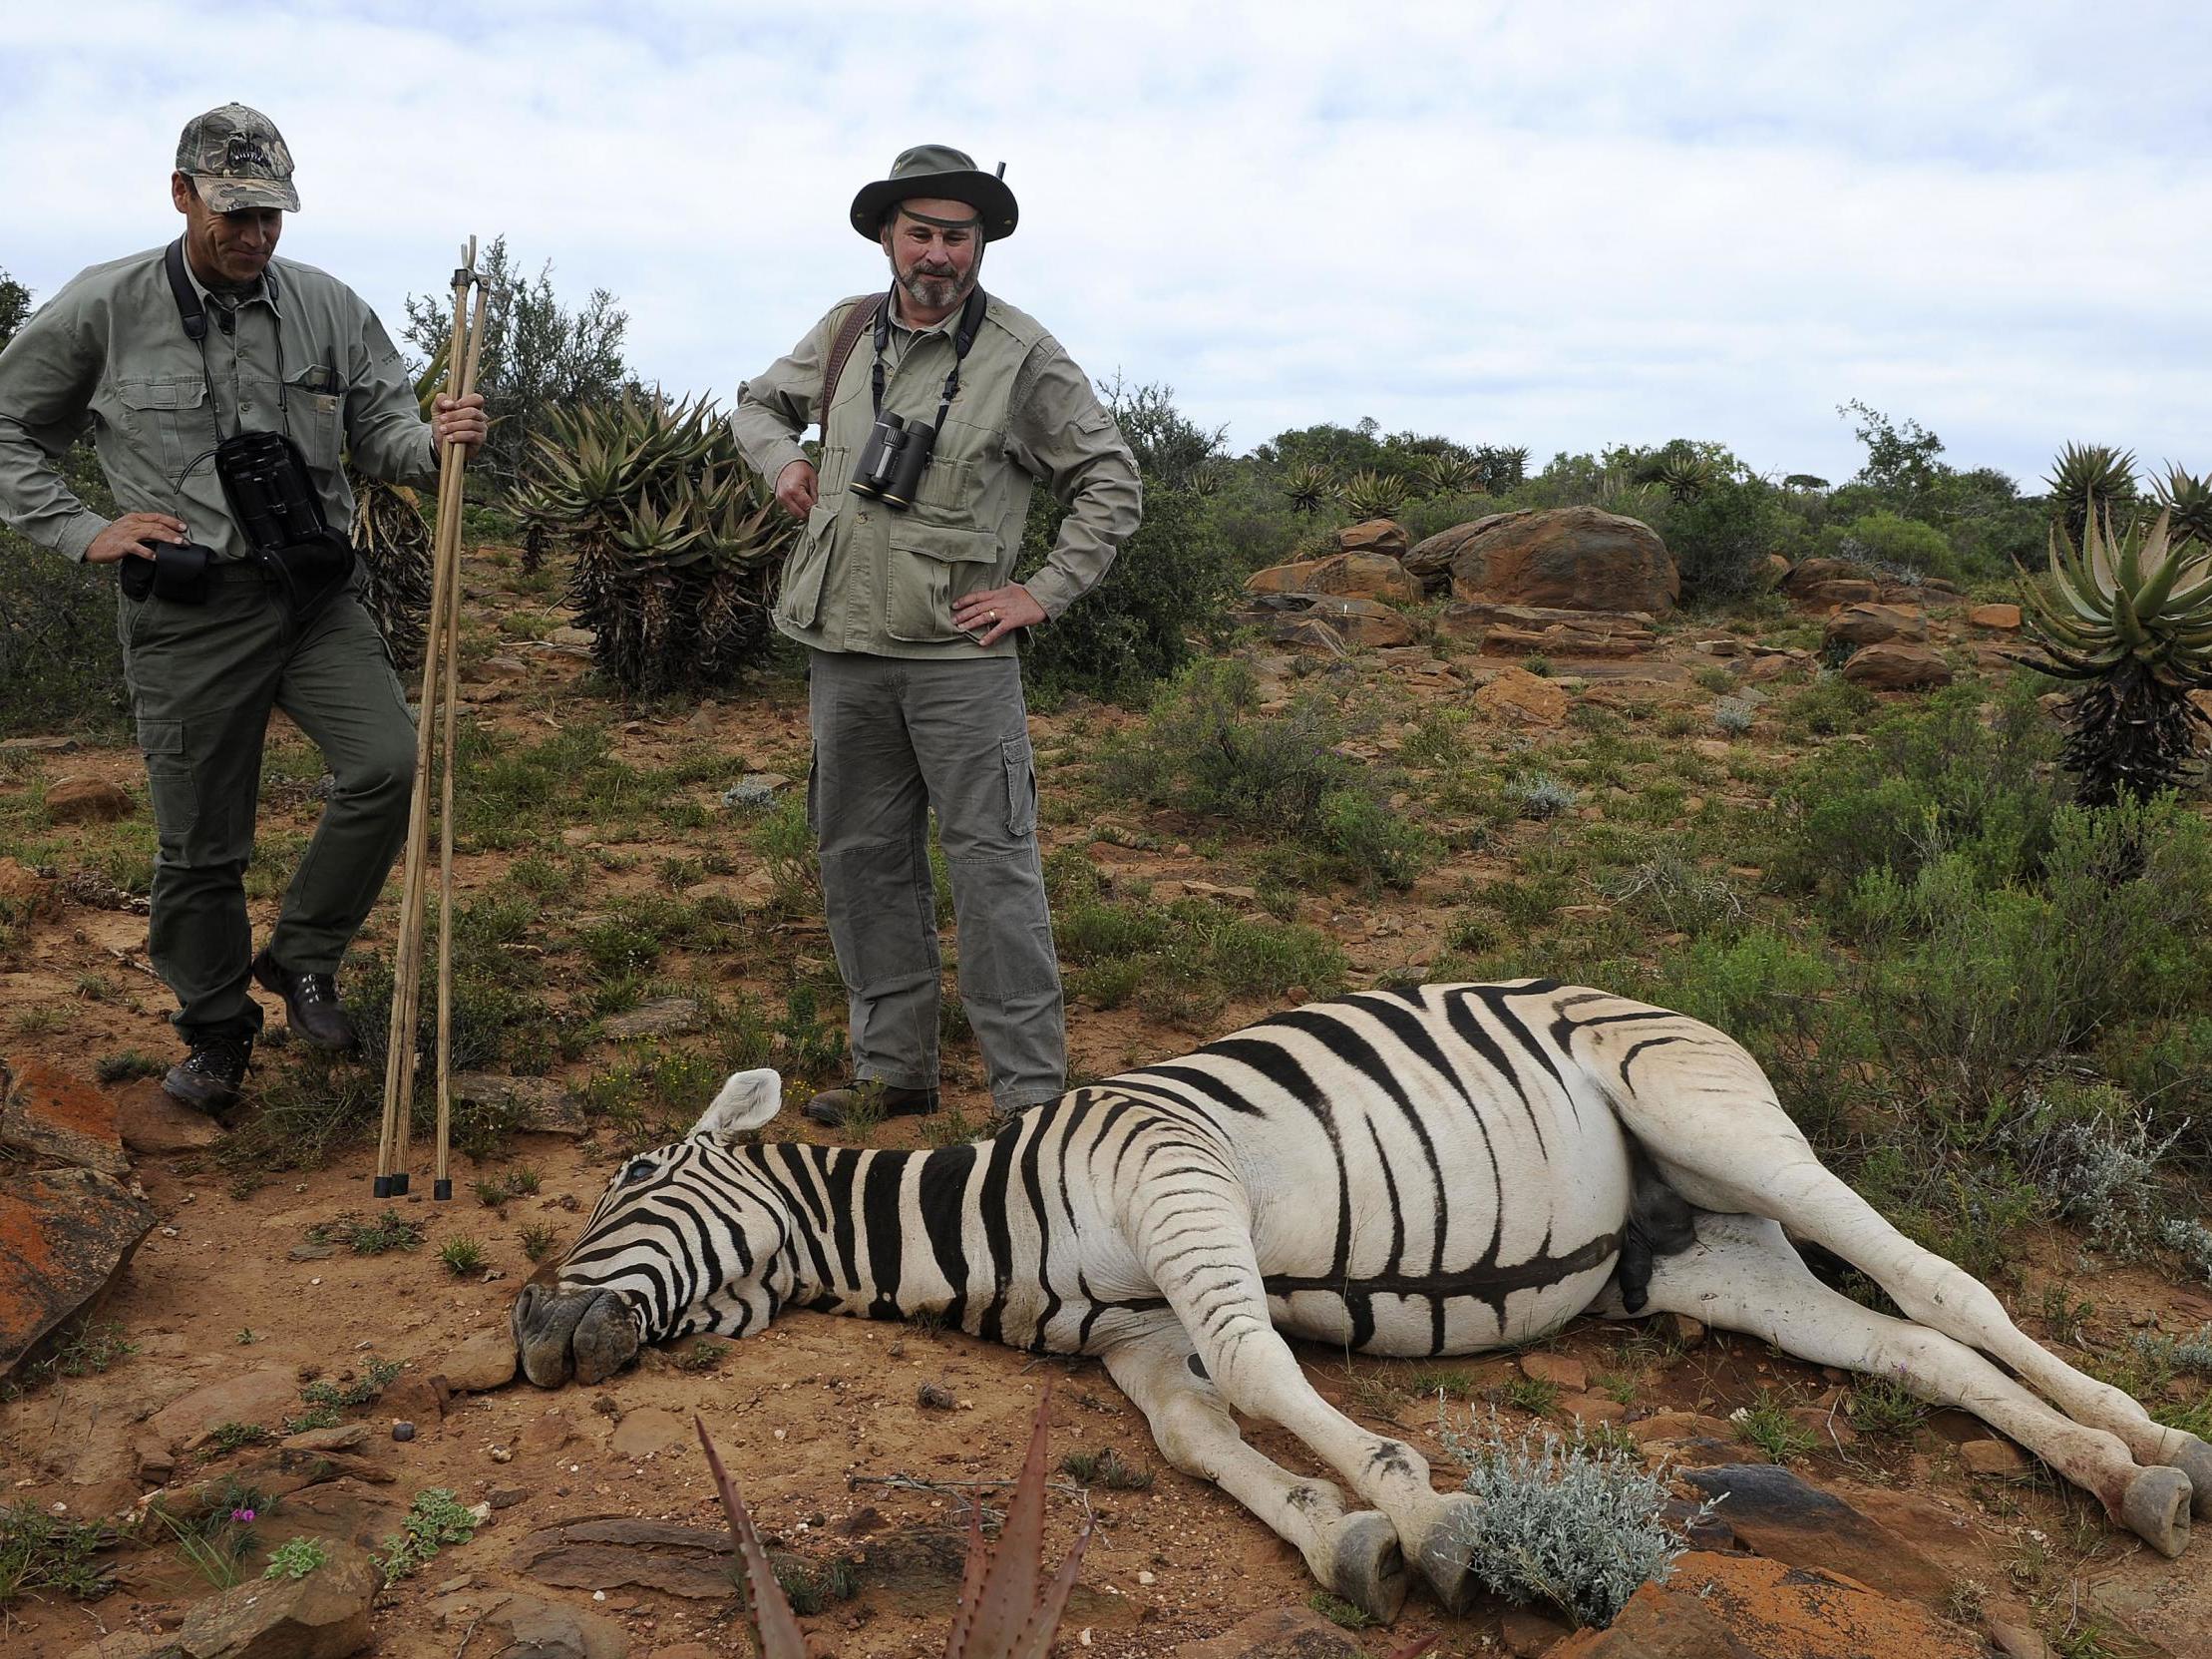 Trophy hunters, often from the US, pay large sums of money to shoot wildlife in Africa